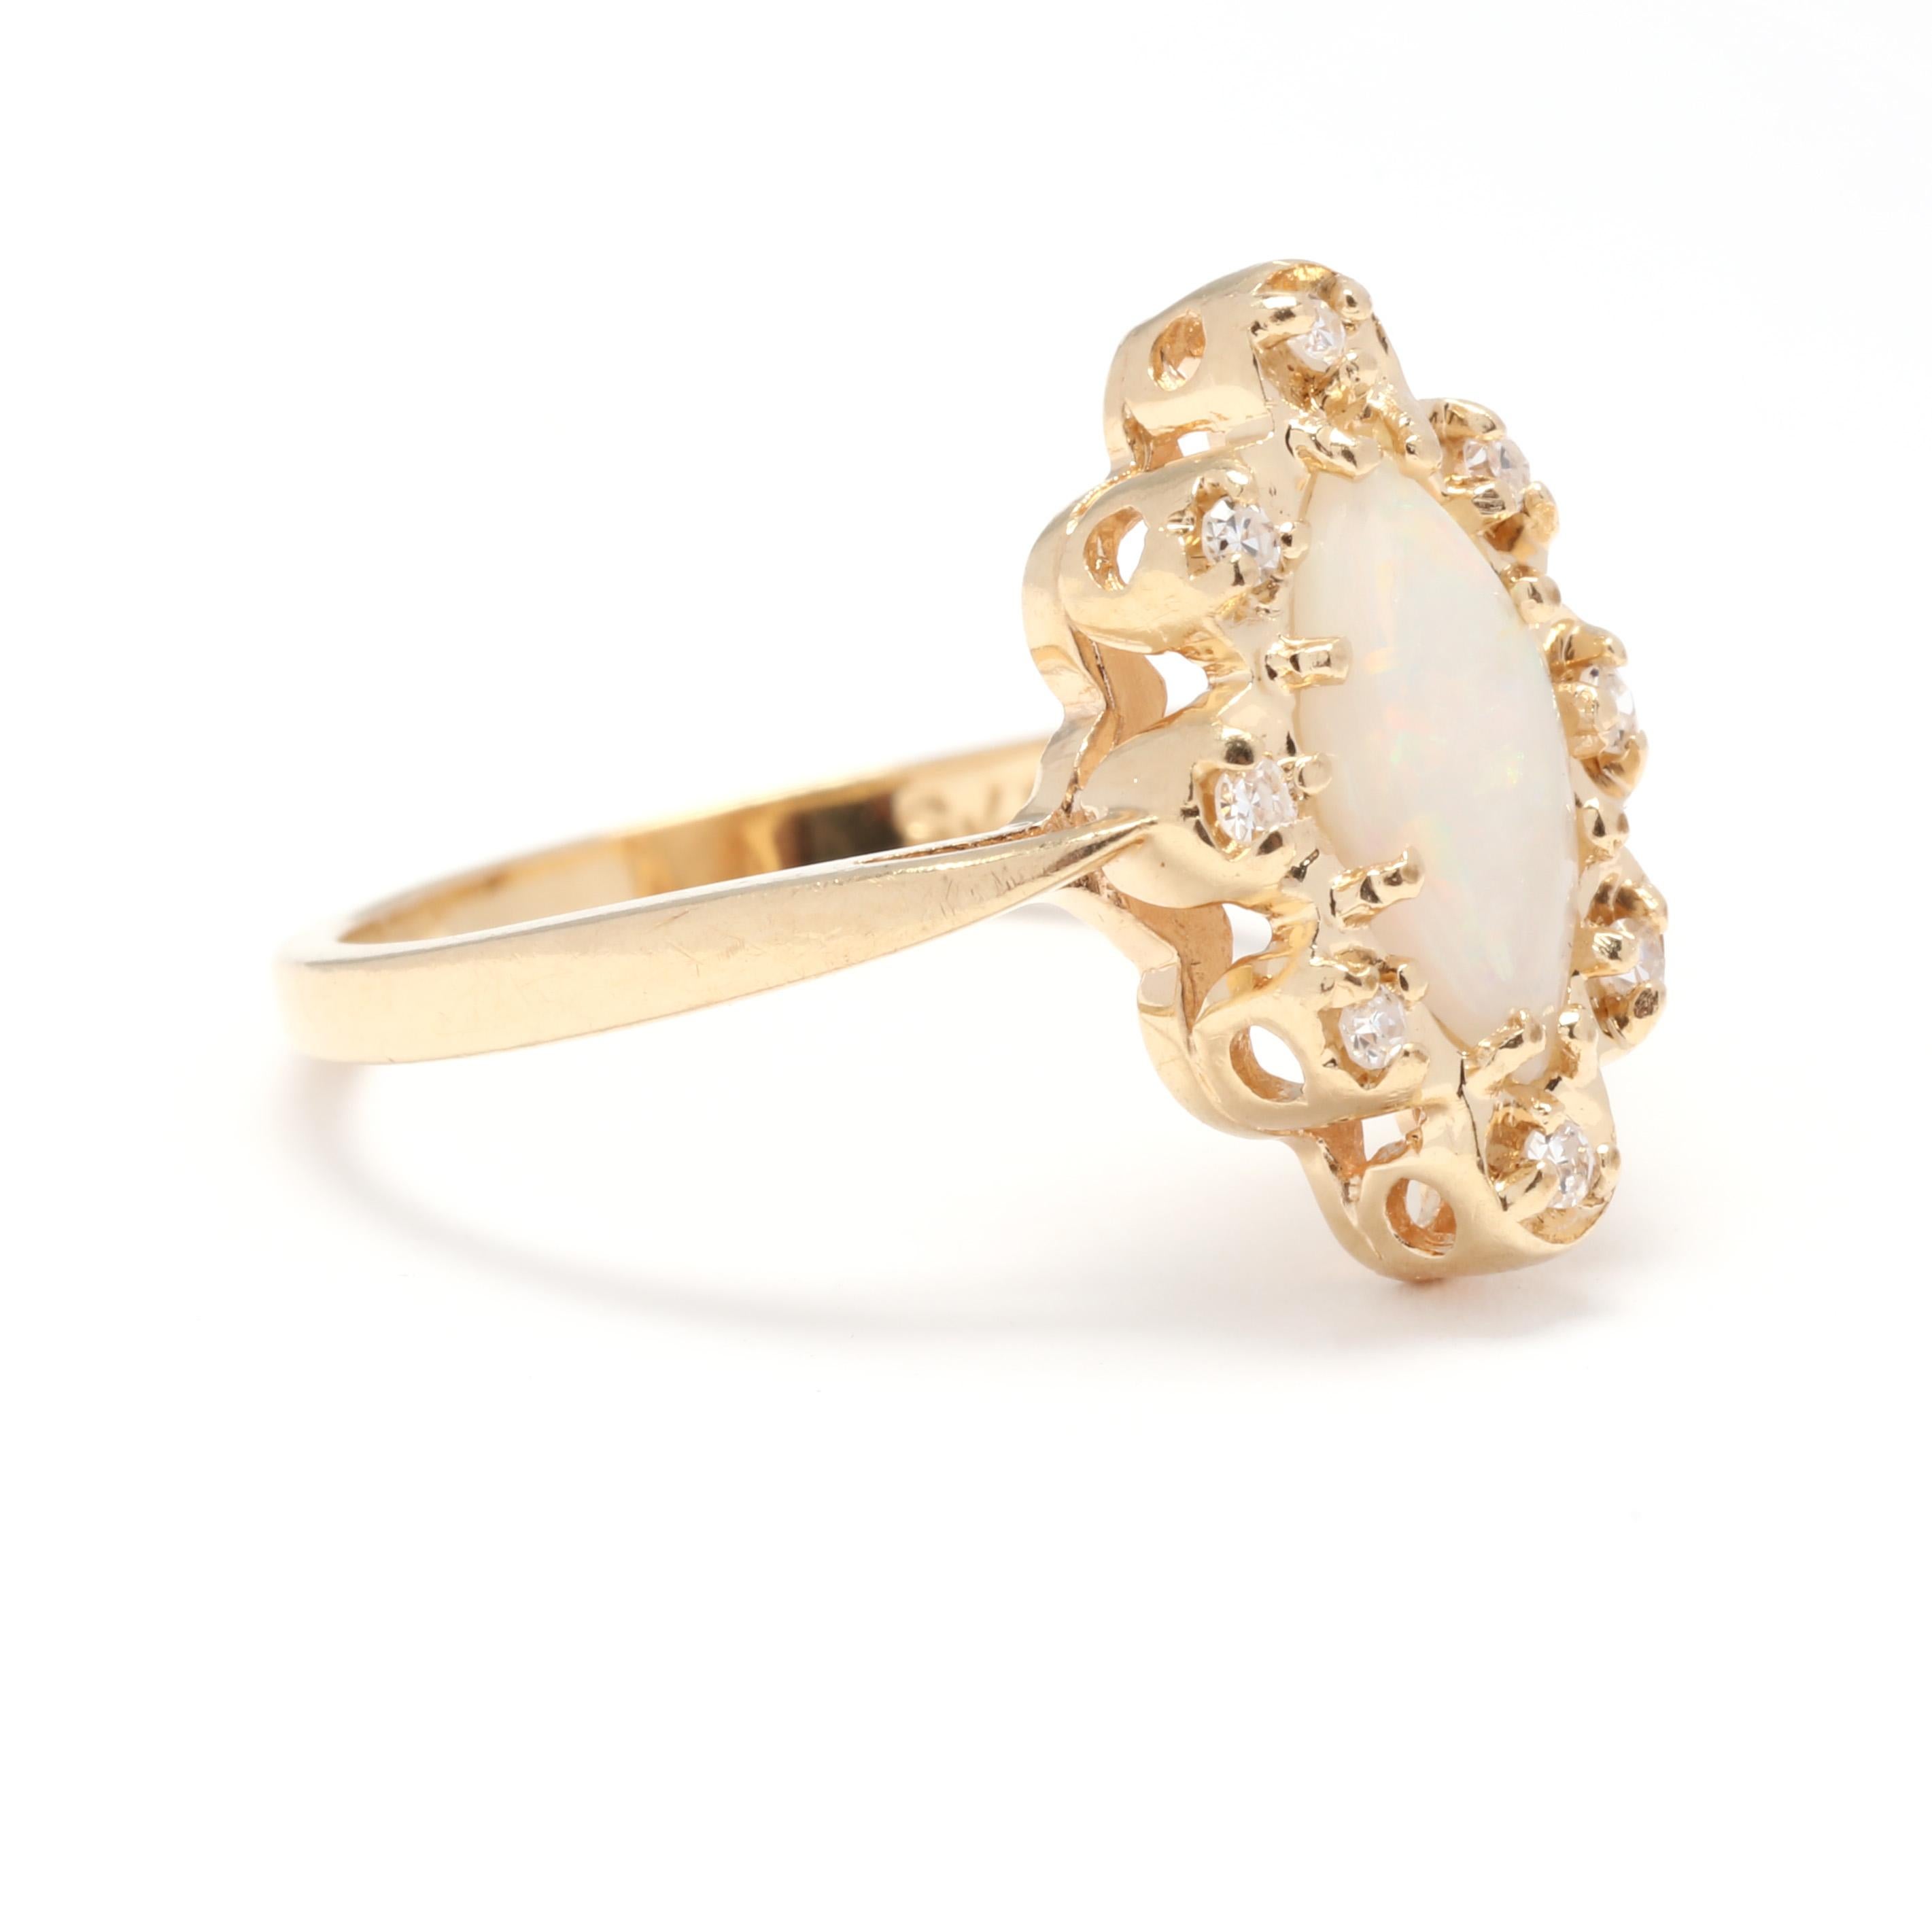 A vintage 14 karat yellow gold opal and diamond navette ring. This October birthstone ring features a prong set, cabochon marquise cut opal weighing approximately .60 carat surrounded by a scalloped halo of single cut round diamonds weighing